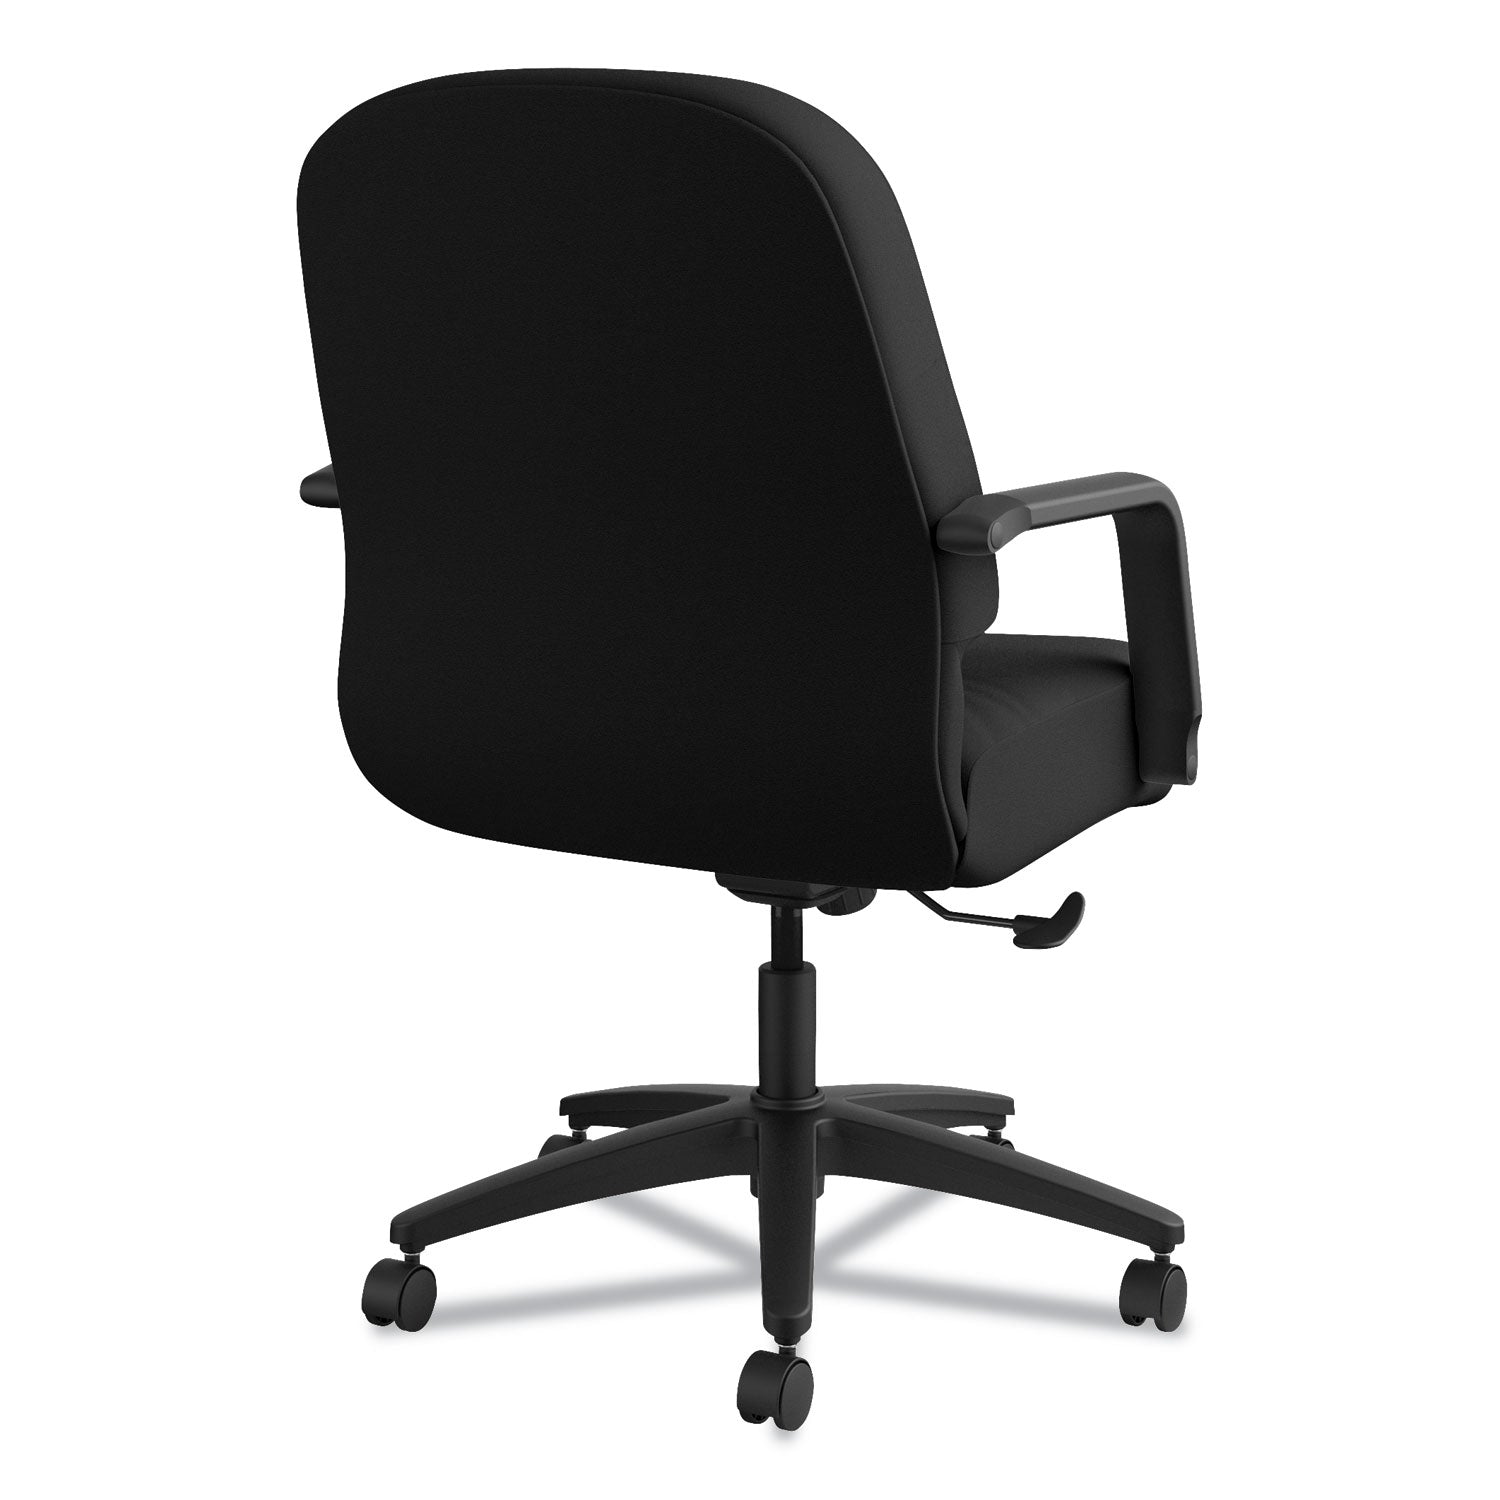 pillow-soft-2090-series-managerial-mid-back-swivel-tilt-chair-supports-up-to-300-lb-17-to-21-seat-height-black_hon2092cu10t - 6